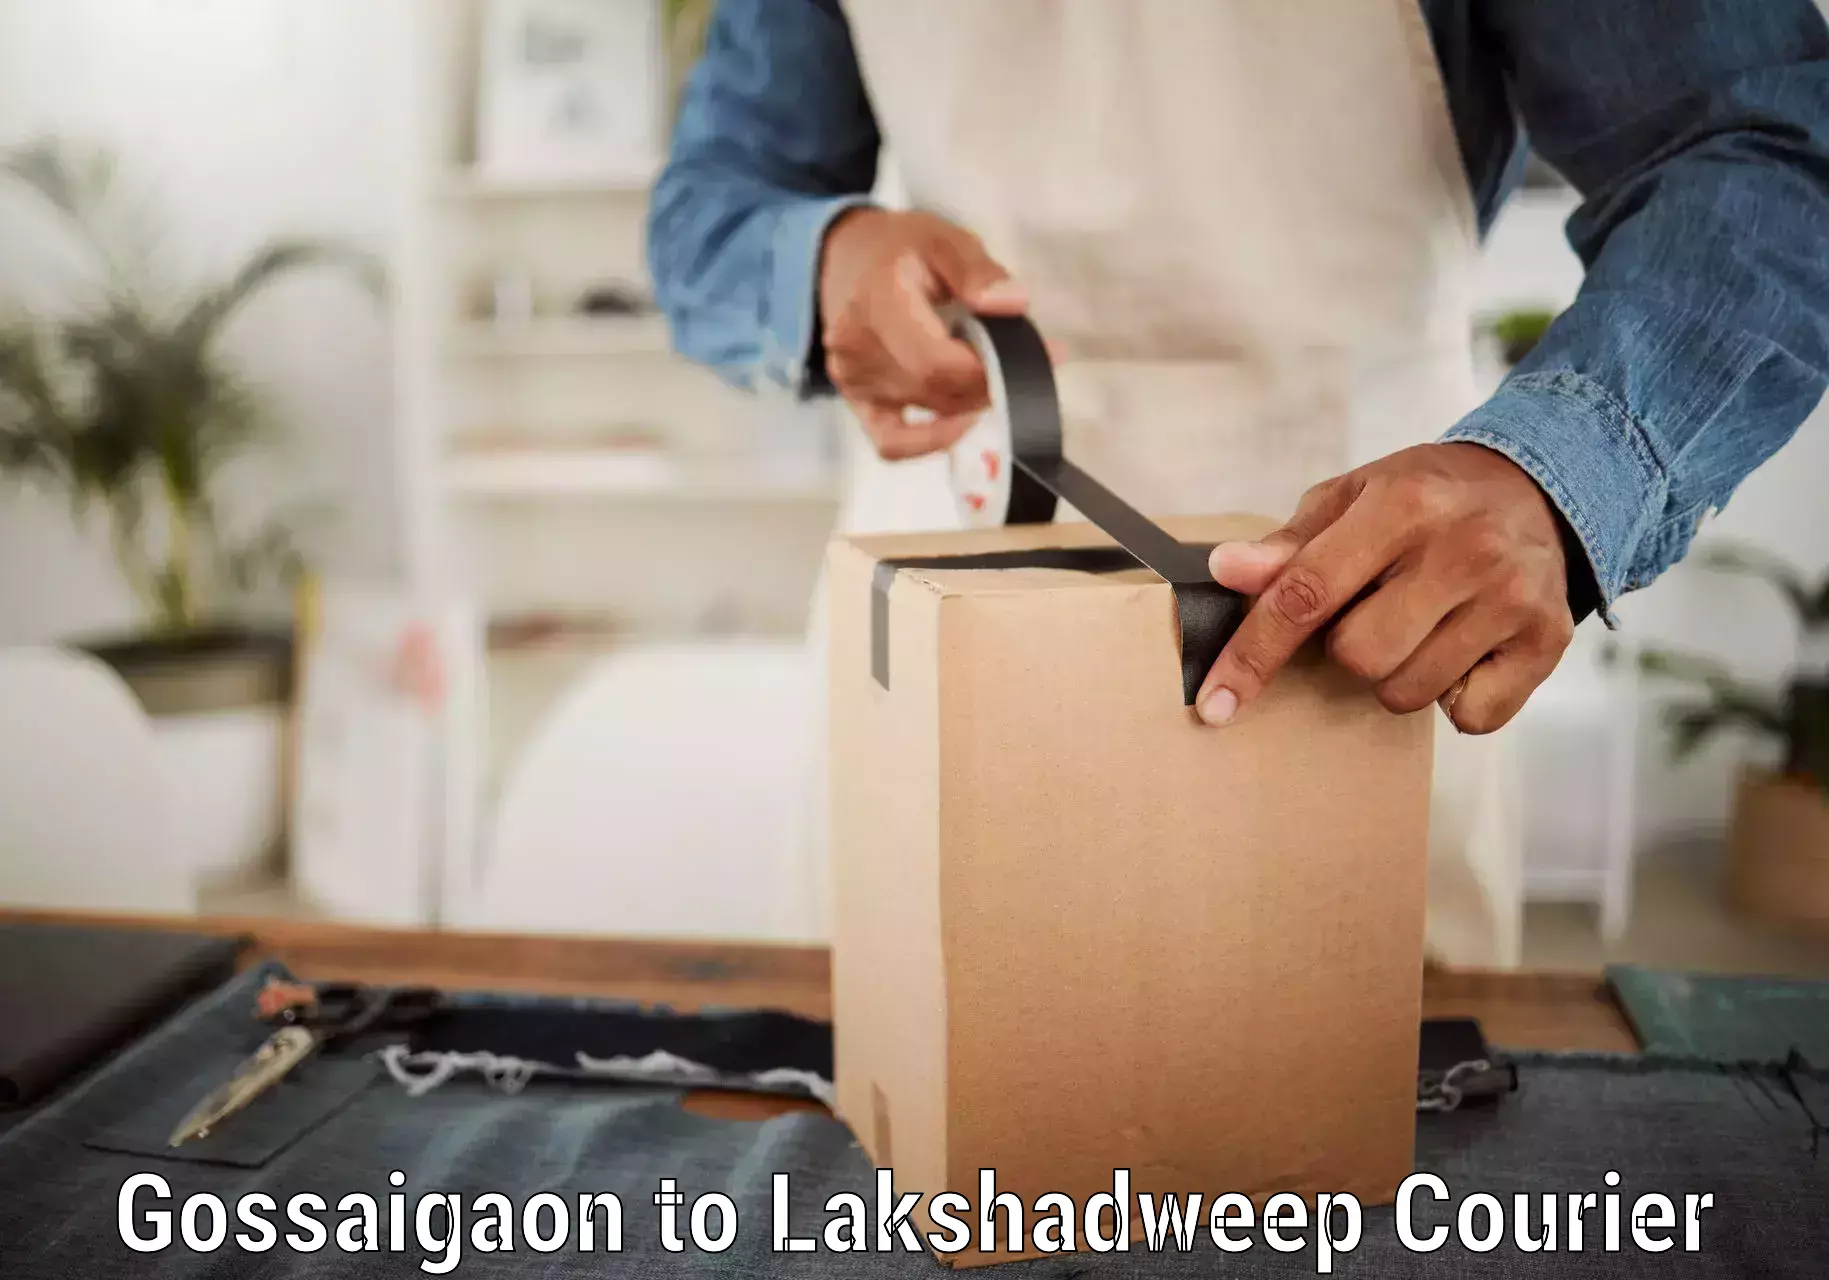 Reliable courier service Gossaigaon to Lakshadweep